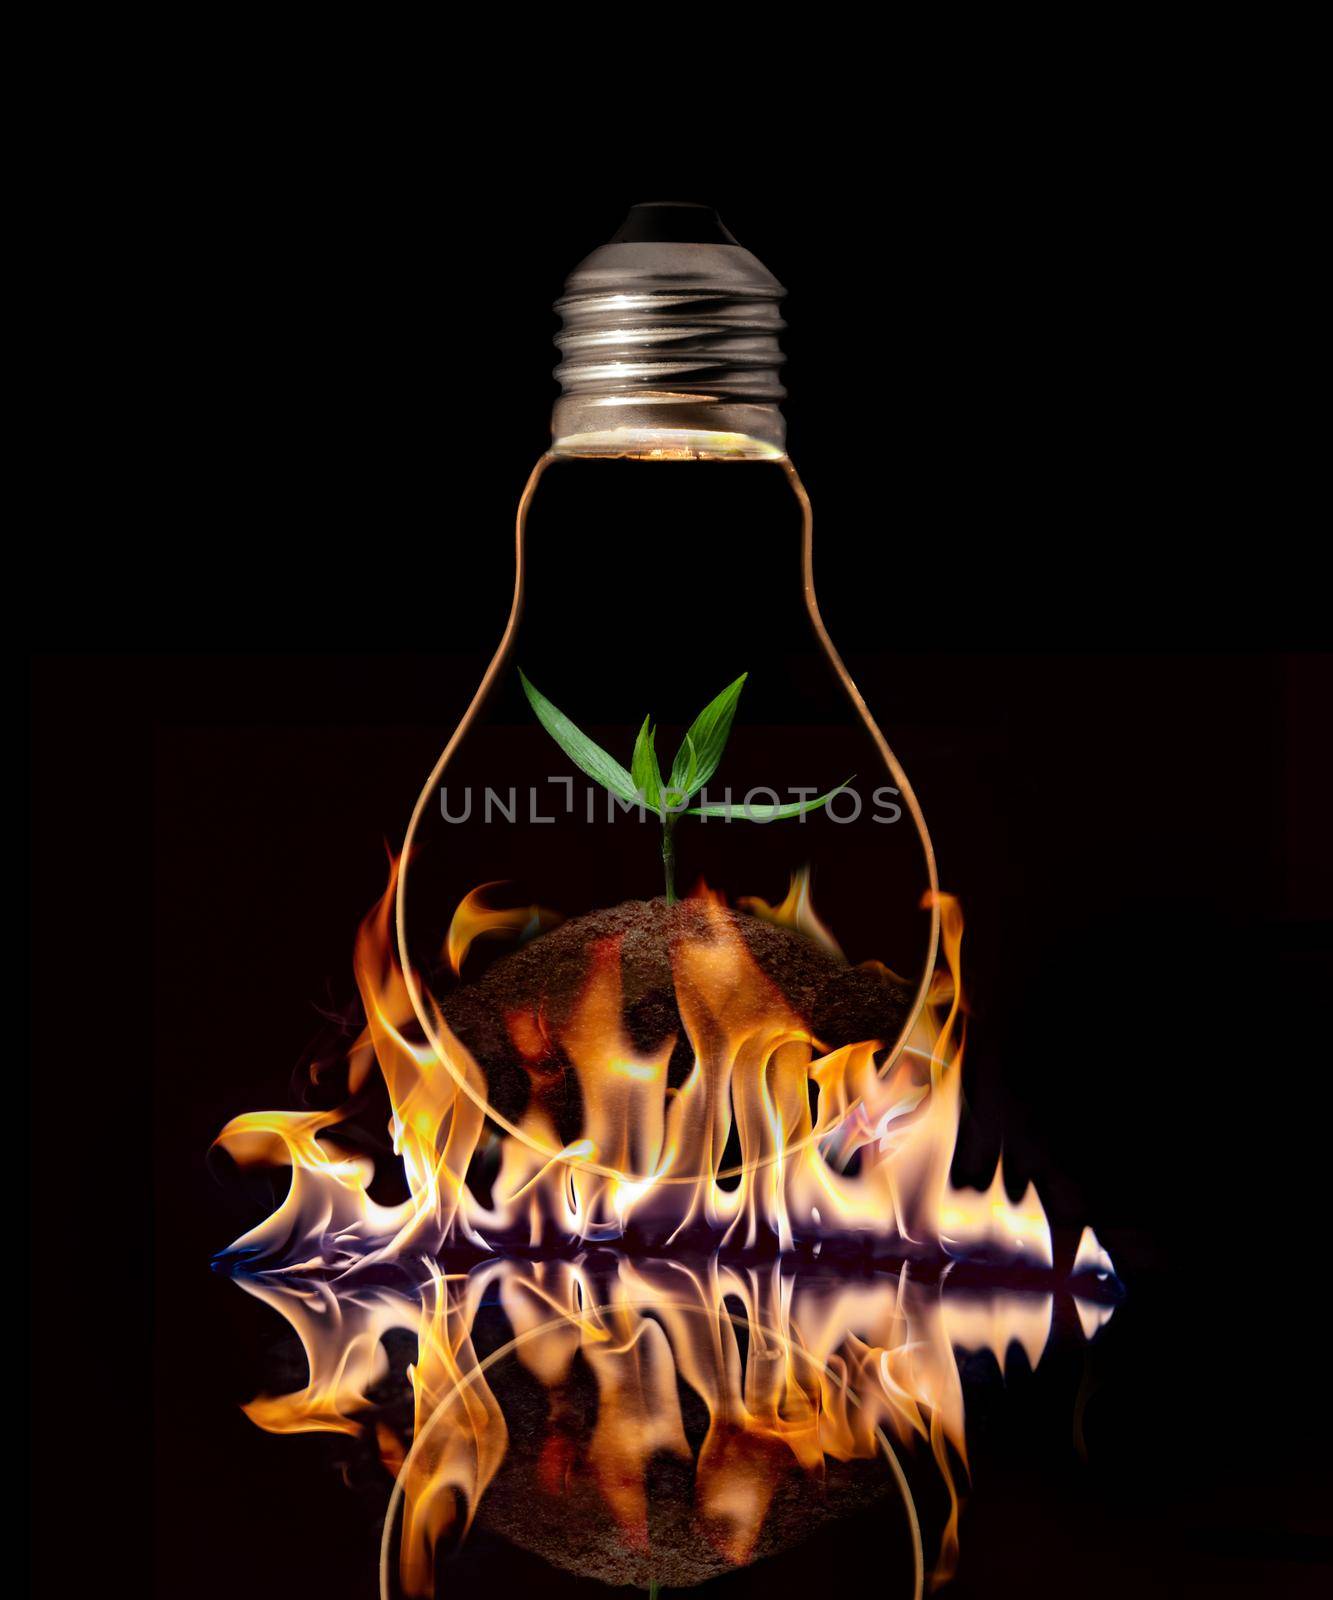 A light bulb with fresh green leaves inside on the fire, isolated on black background.